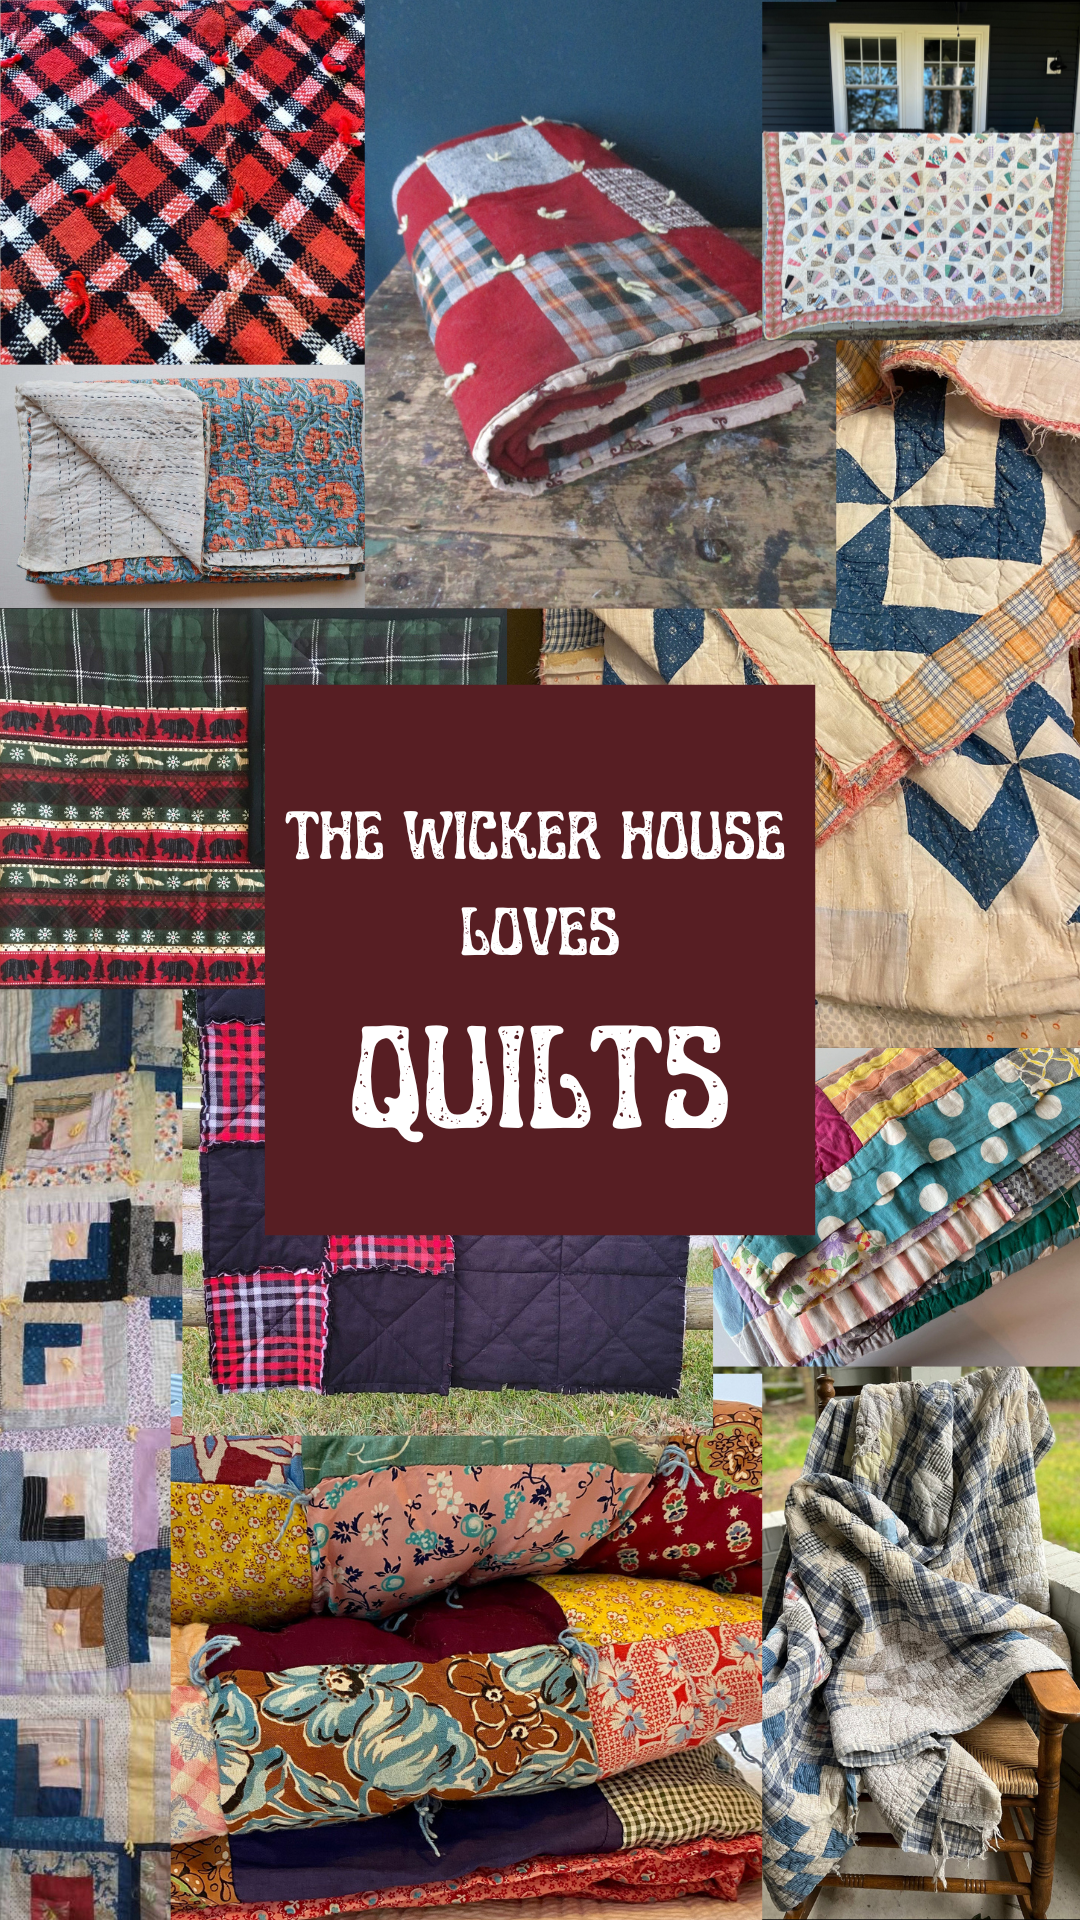 THE WICKER HOUSE LOVES QUILTS